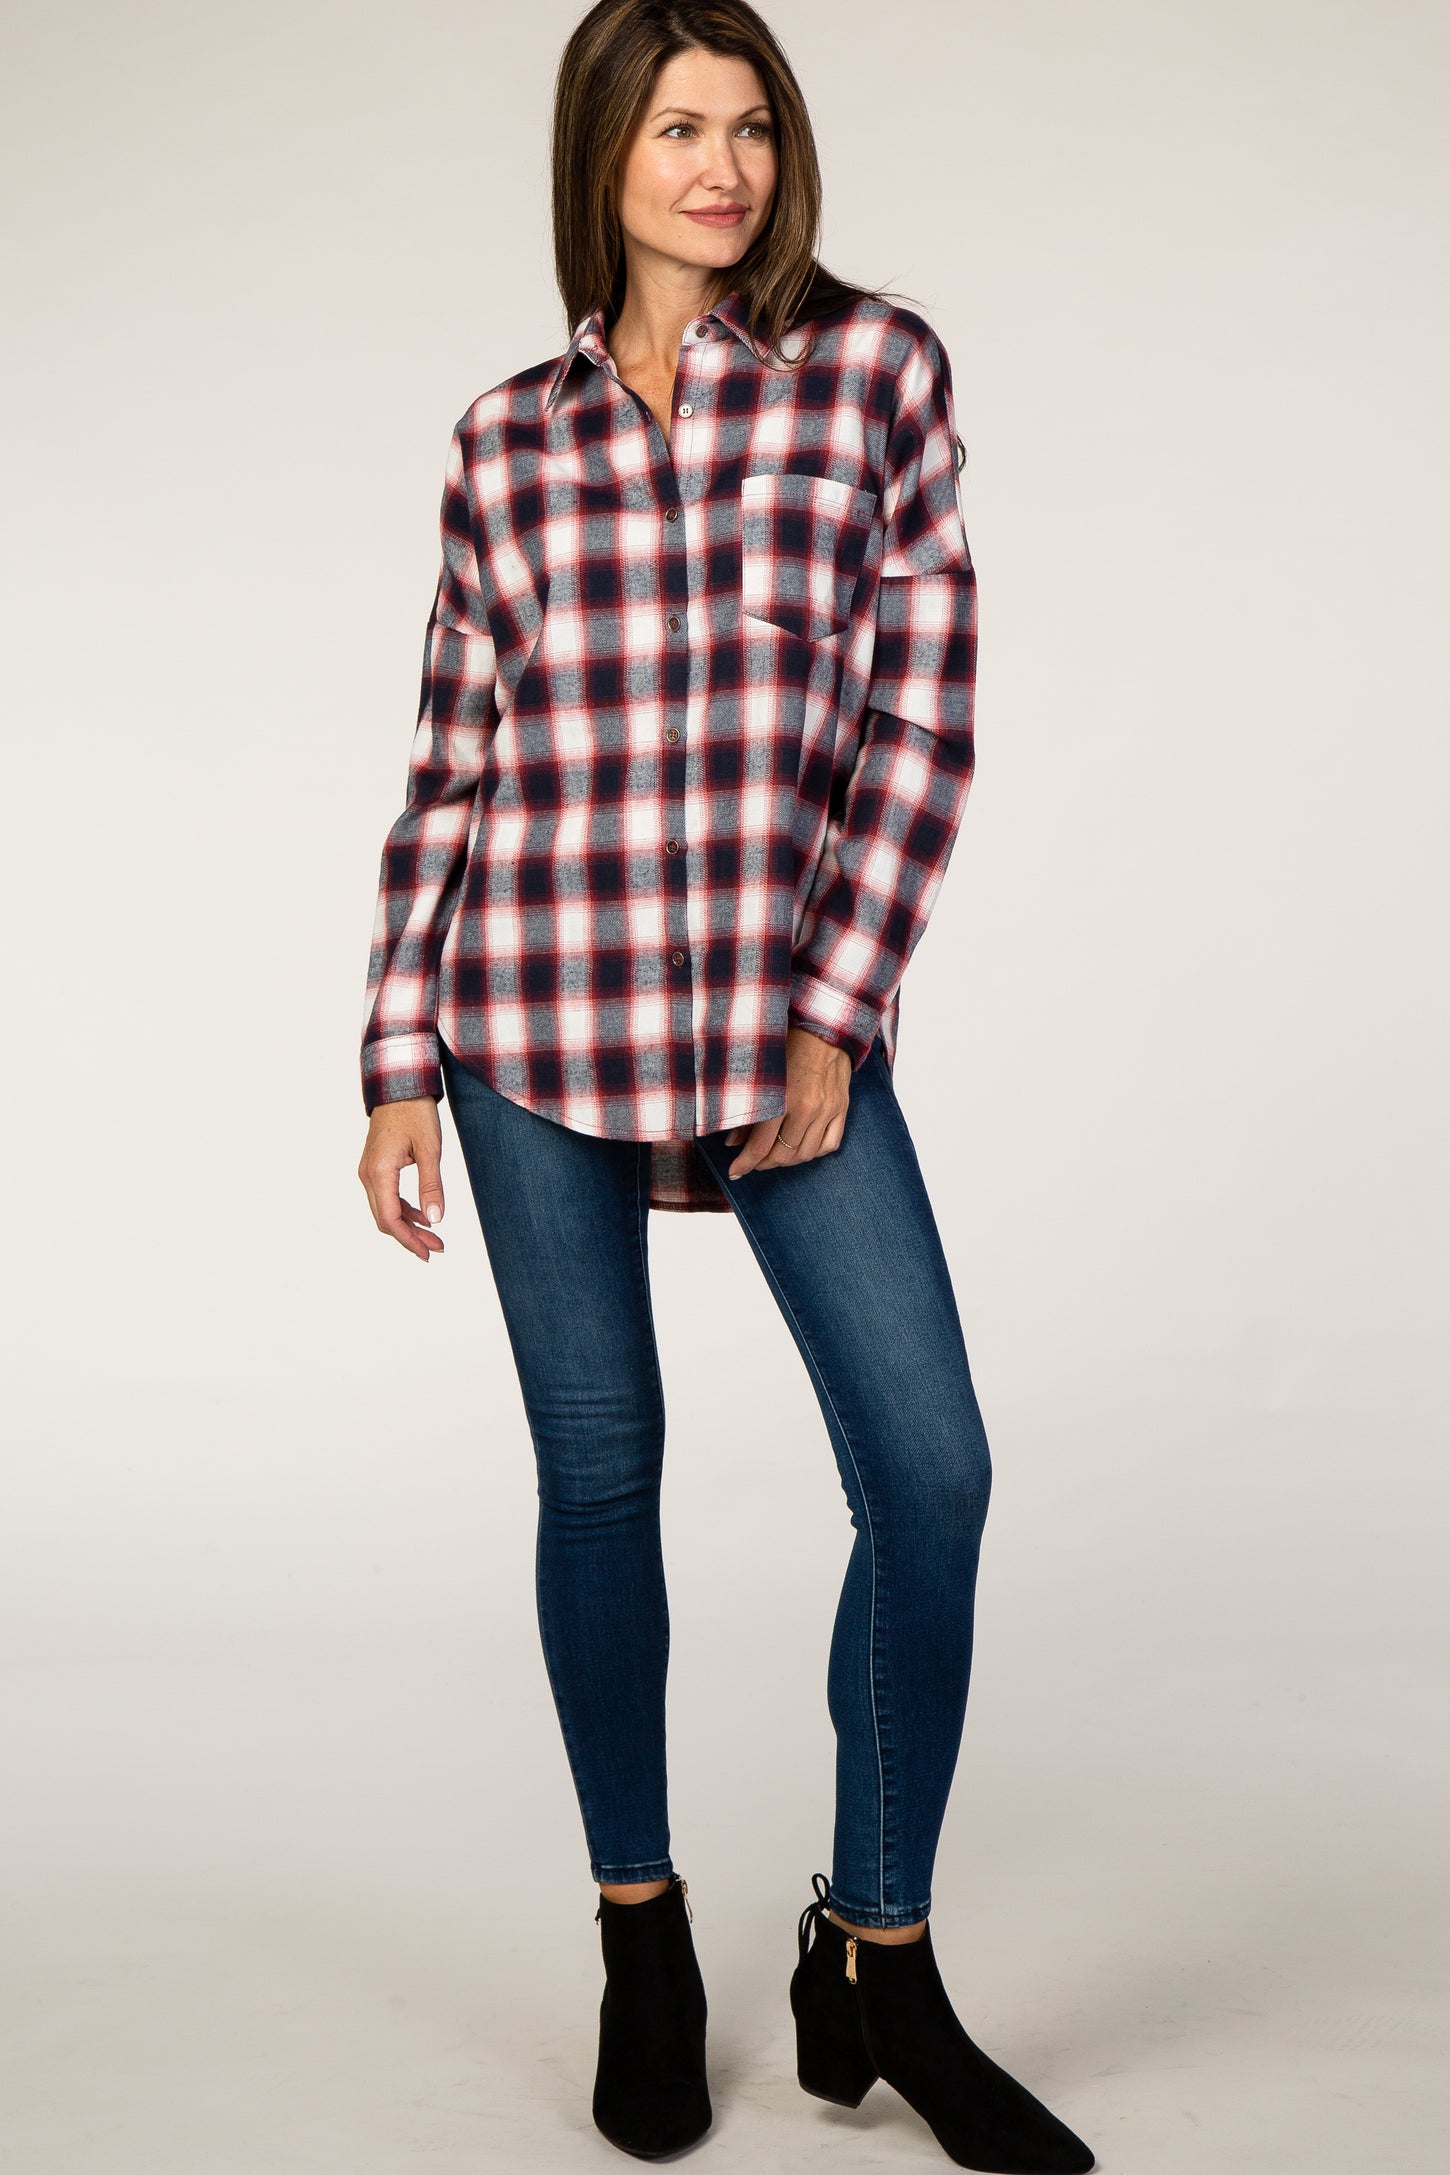 Red Plaid Long Sleeve Button Down Top